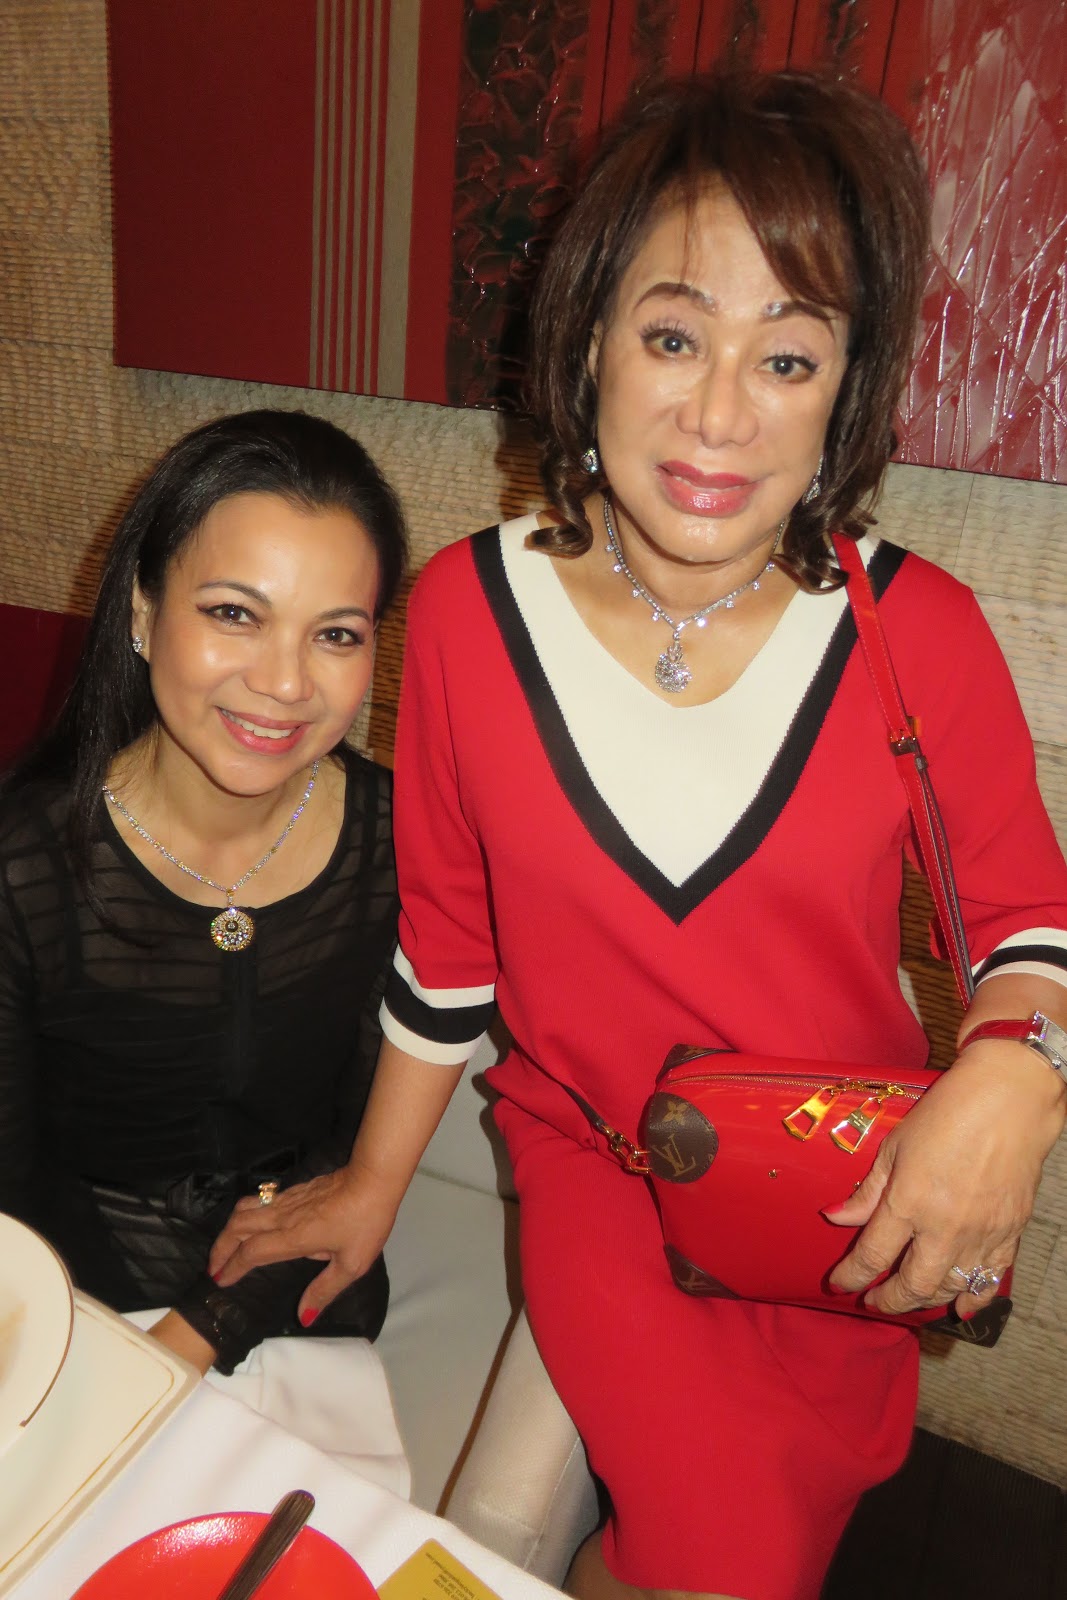 Kee Hua Chee Live Happy Valentine S Day Princess Dato Sri Dr Becky Leogardo Hosted Valentine S Dinner At Cedar Restaurant On The 15th Floor Of Impiana Klcc Hotel For 2 Couple She And Myself